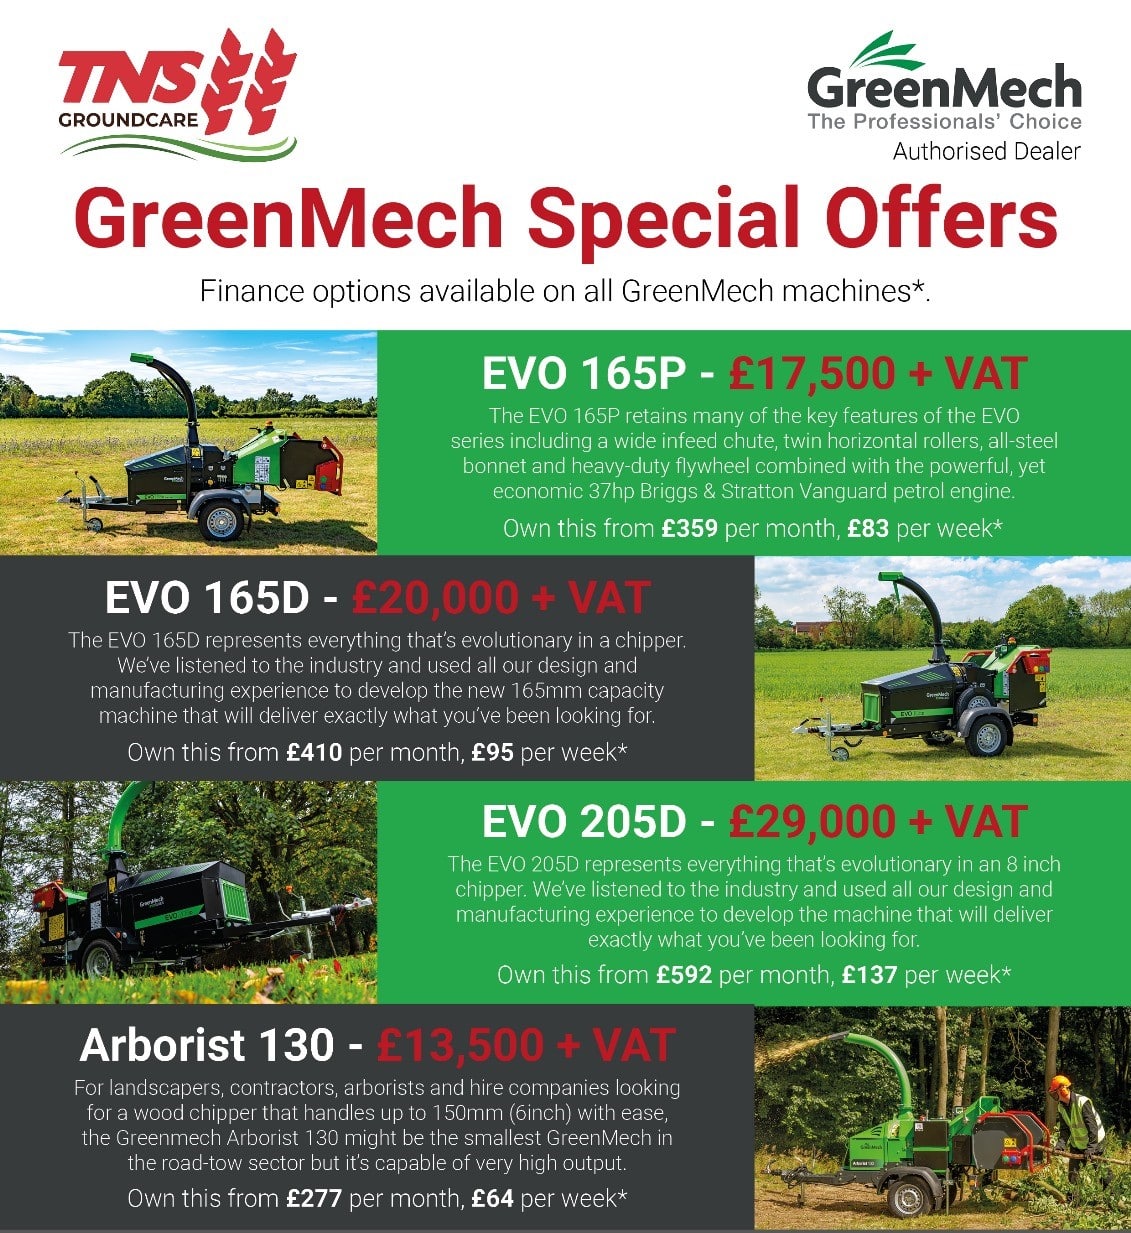 GreenMech wood chippers for sale at Thurlow Nunn Standen